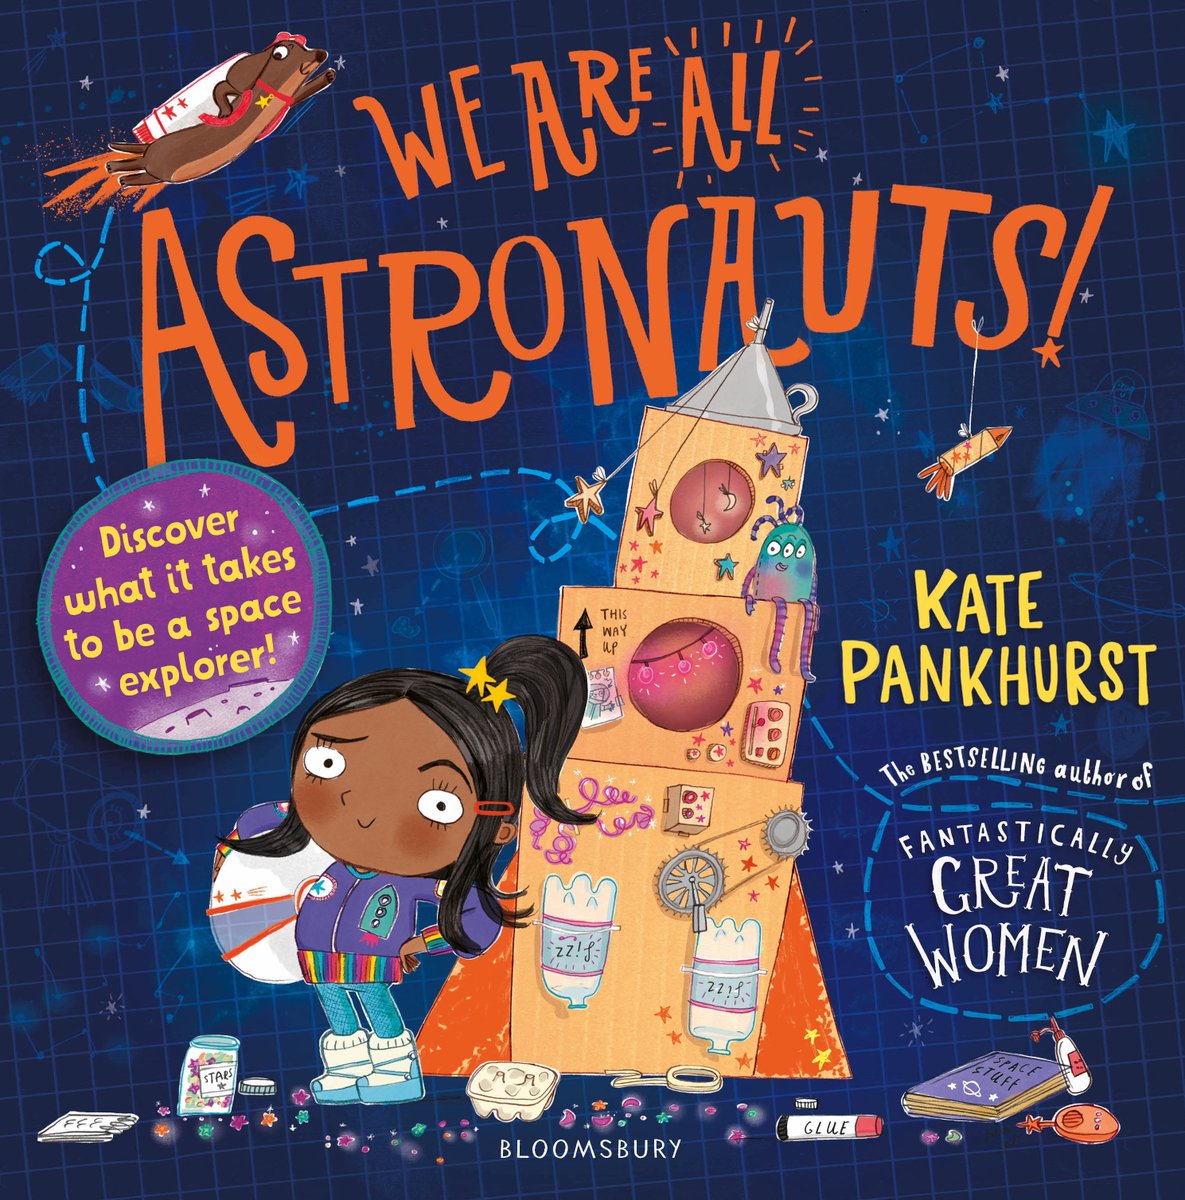 Ever wanted to be an astronaut? Well guess what? You already are! Find out more about the wonders of space with the amazing @KateisDrawing at @TheStoryMuseum this December! bit.ly/3SSe2pq